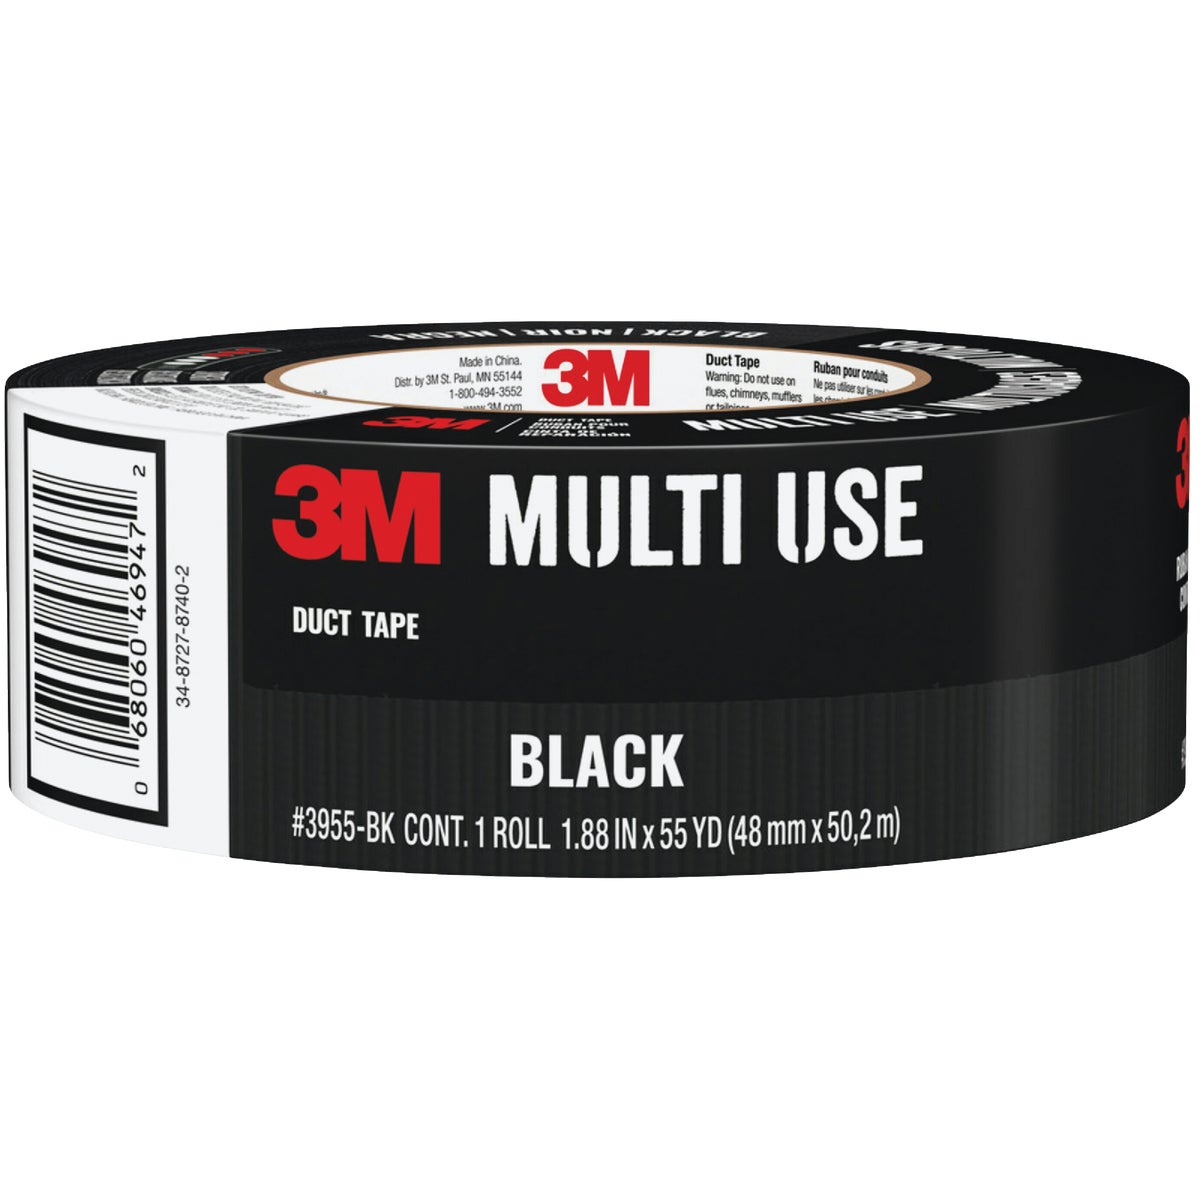 3M 1.88 In. x 60 Yd. Colored Duct Tape, Black